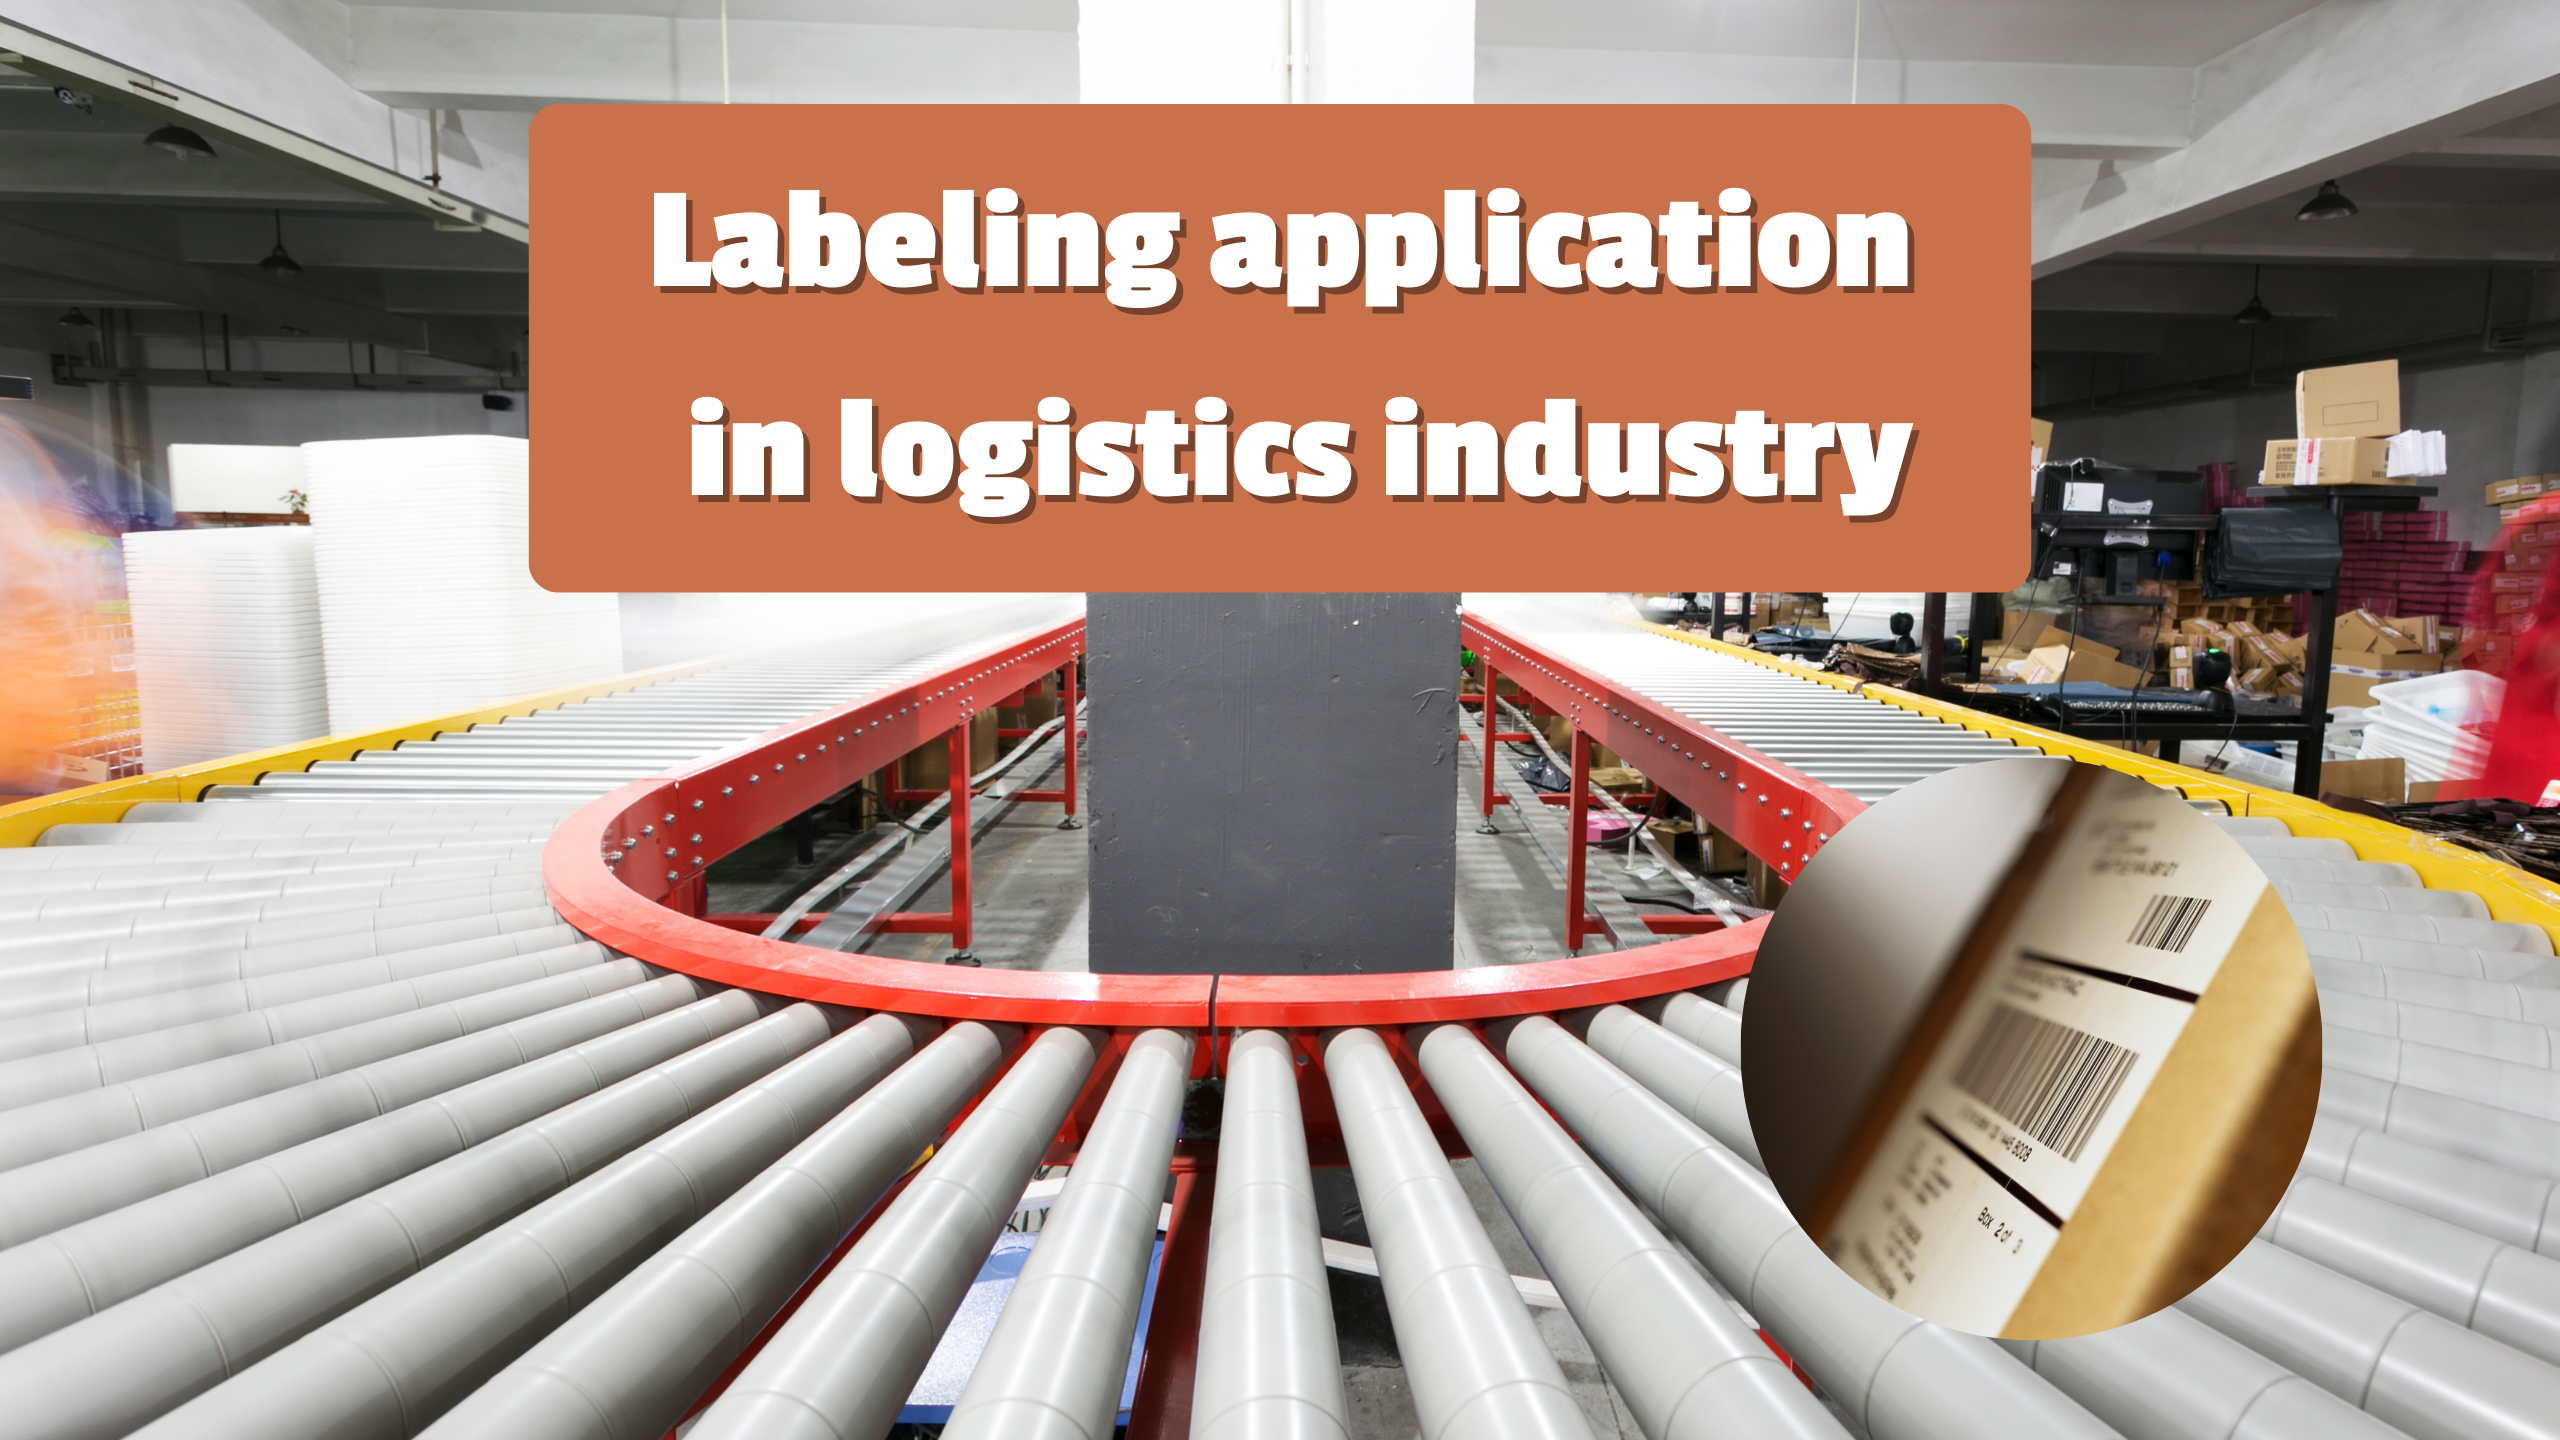 The Impact of Fully Automated Labeling Machine on the Logistics Industry